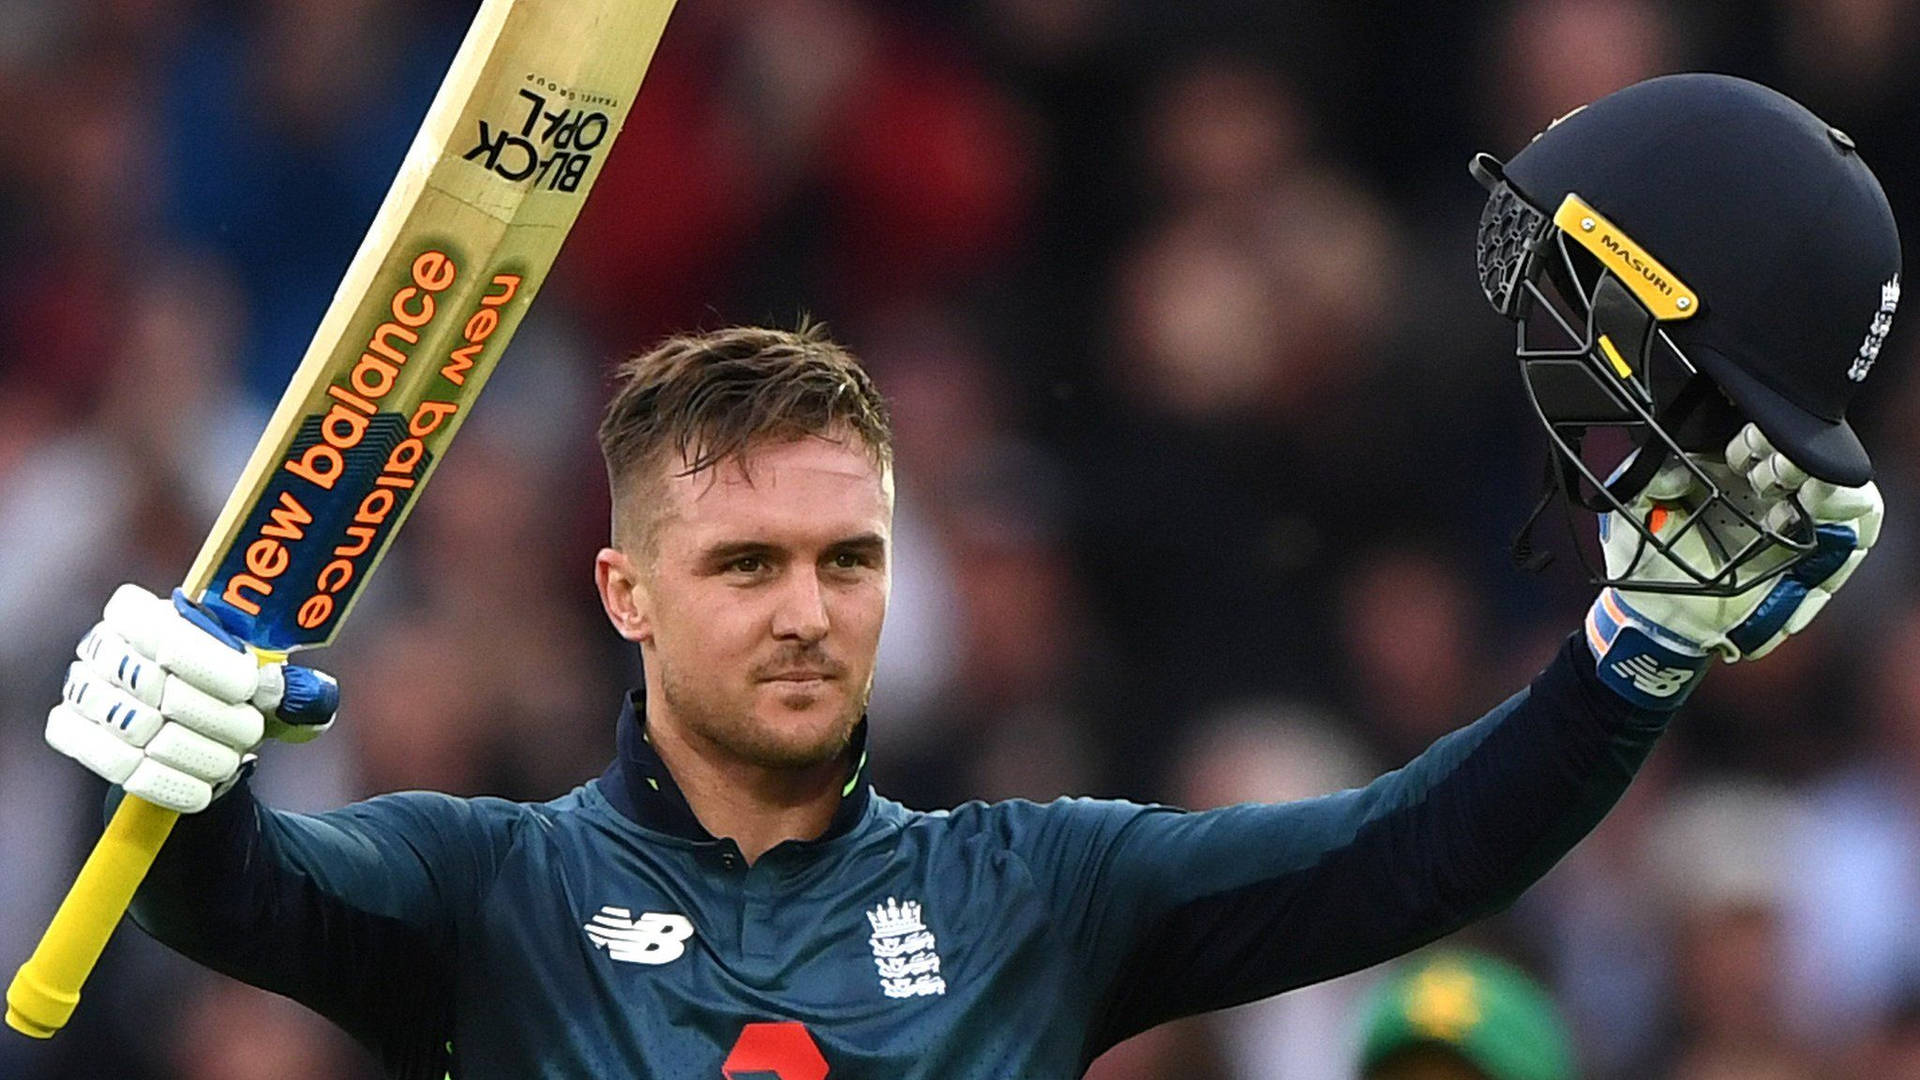 Striking Powerhouse - Jason Roy With Bat And Helmet In Action Background